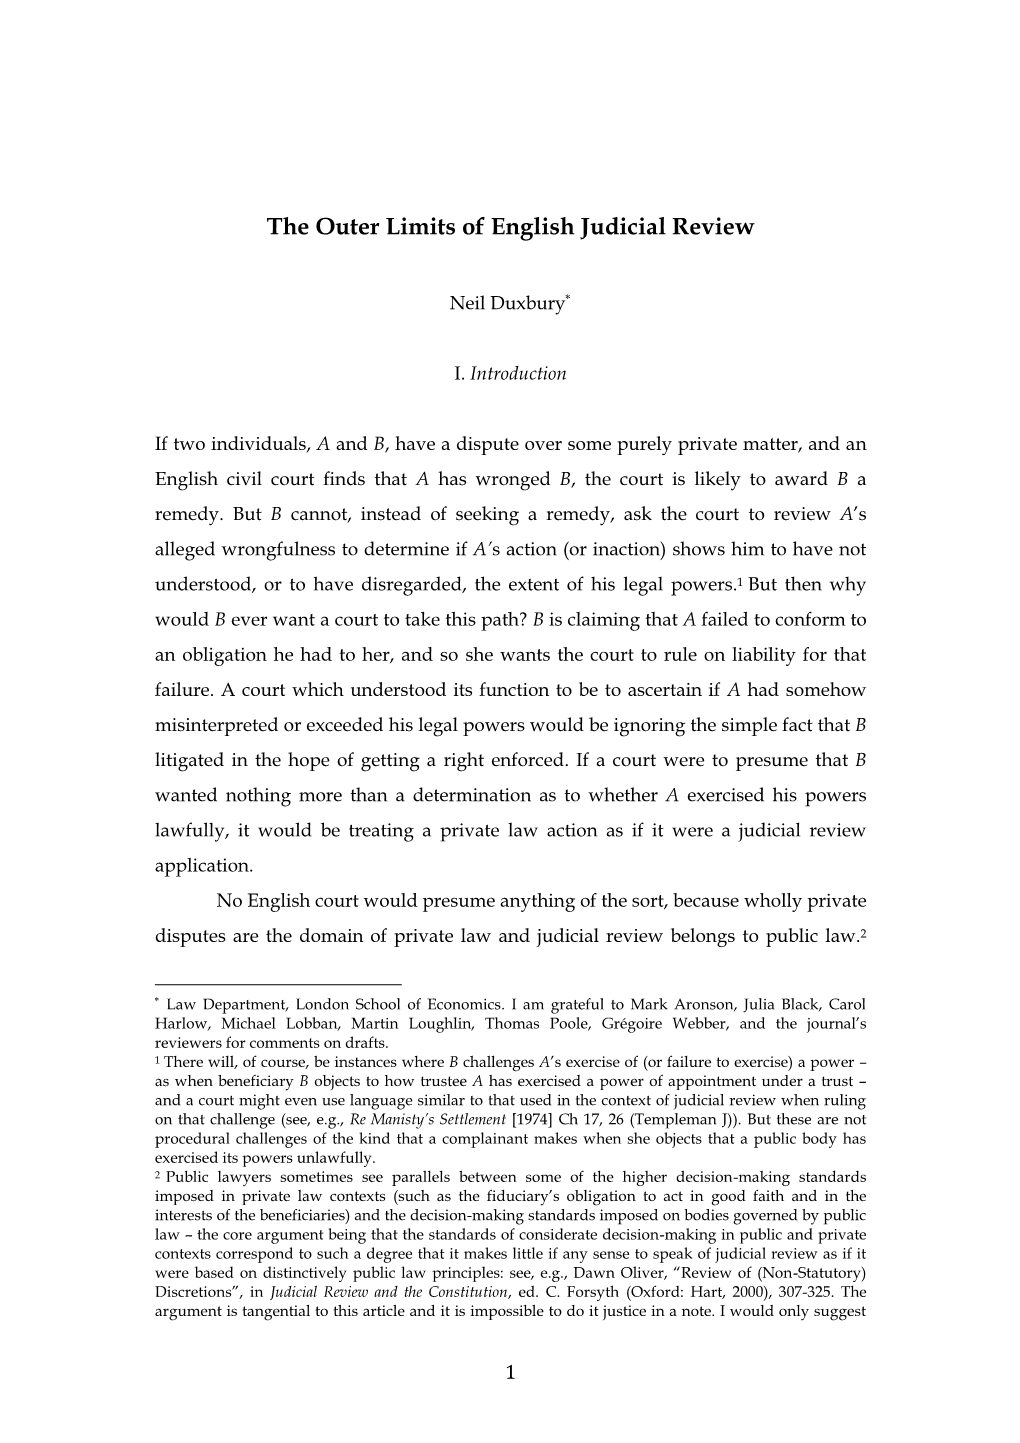 The Outer Limits of English Judicial Review